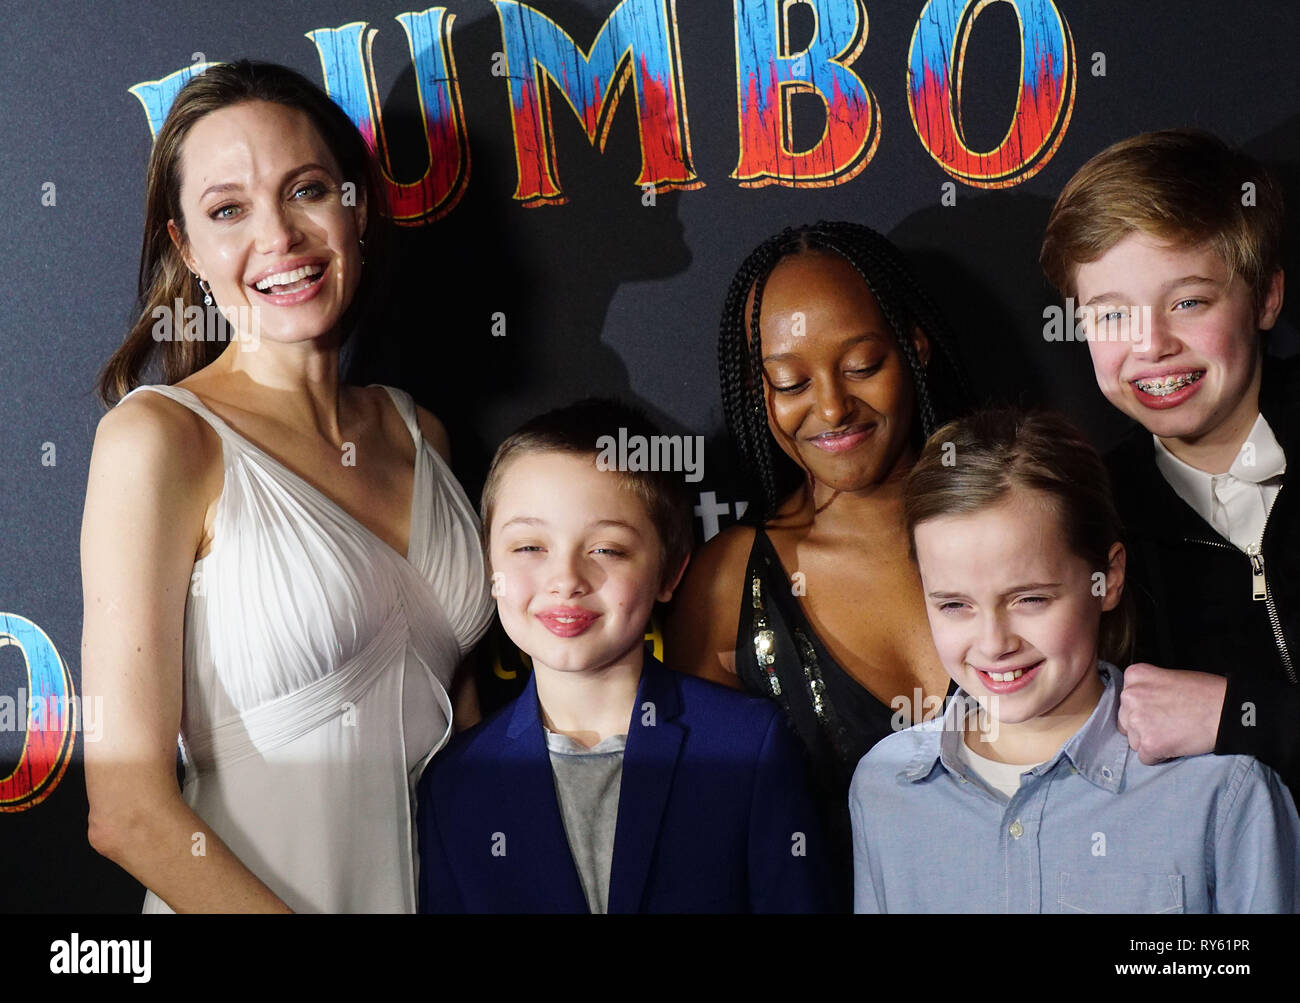 Hollywood, California, USA. 11th Mar, 2019. Angelina Jolie with her children Knox Jolie-Pitt and Zahara Marley Jolie-Pitt  027 attend the premiere of Disney s Dumbo at El Capitan Theatre on March 11, 2019 in Los Angeles, California. Credit: Tsuni / USA/Alamy Live News Stock Photo